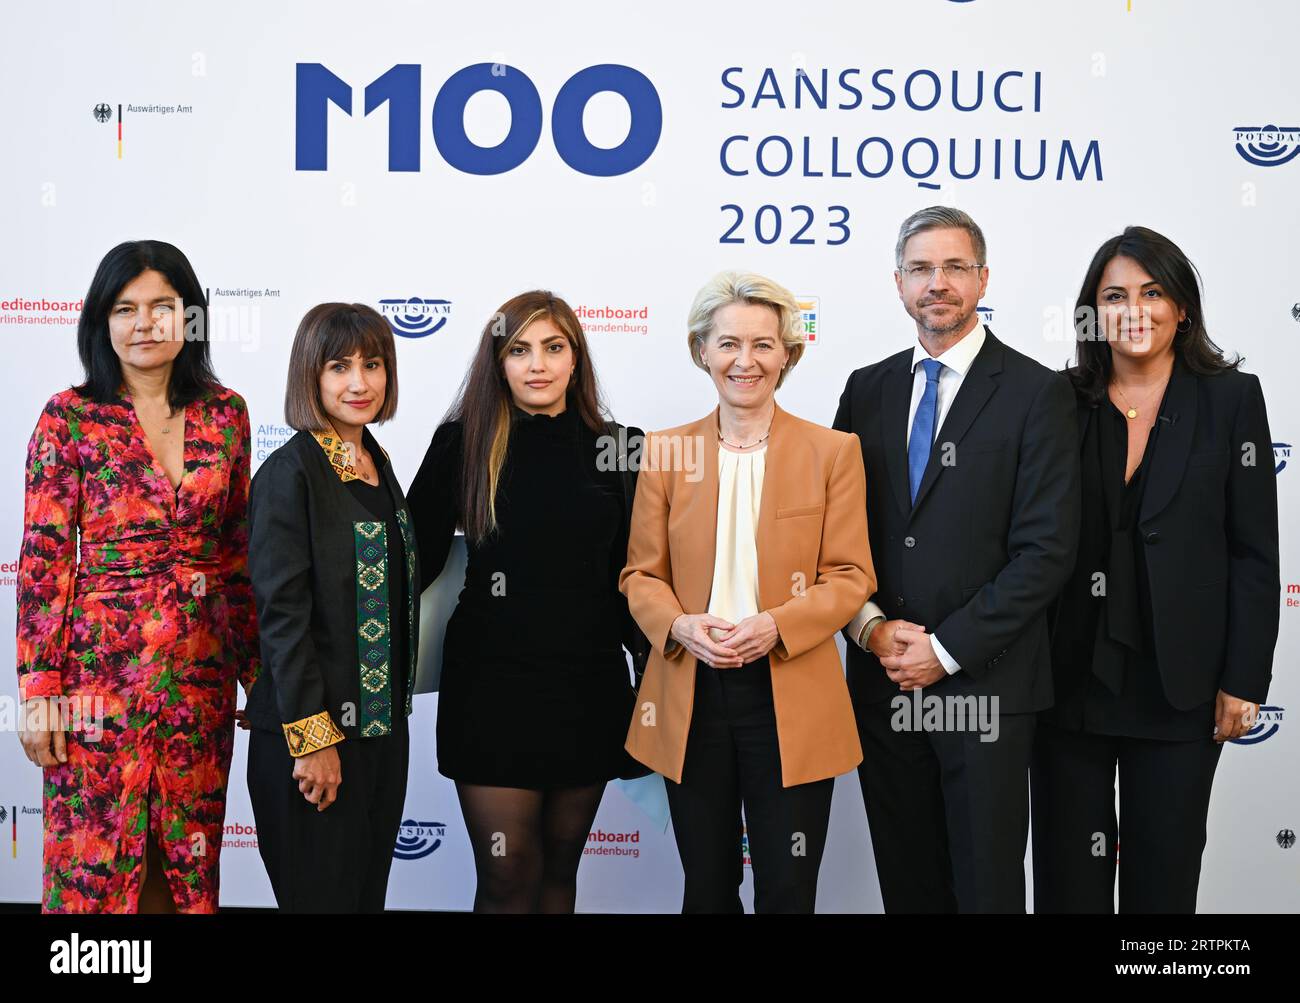 Potsdam, Germany. 14th Sep, 2023. Jasmin Tabatabai (l-r), German-Iranian actress and musician, Mersedeh Shahinkar, Iranian activist, Shima Babaei, Iranian women's rights activist, Ursula von der Leyen, President of the European Commission, Mike Schubert (SPD), Mayor of the City of Potsdam, and Düzen Tekkal, human rights activist, stand next to each other before the start of the M100 Media Award ceremony. The M100 Media Award has been presented since 2005 as part of the international media conference M100 Sanssouci Colloquium. Credit: Soeren Stache/dpa/Alamy Live News Stock Photo